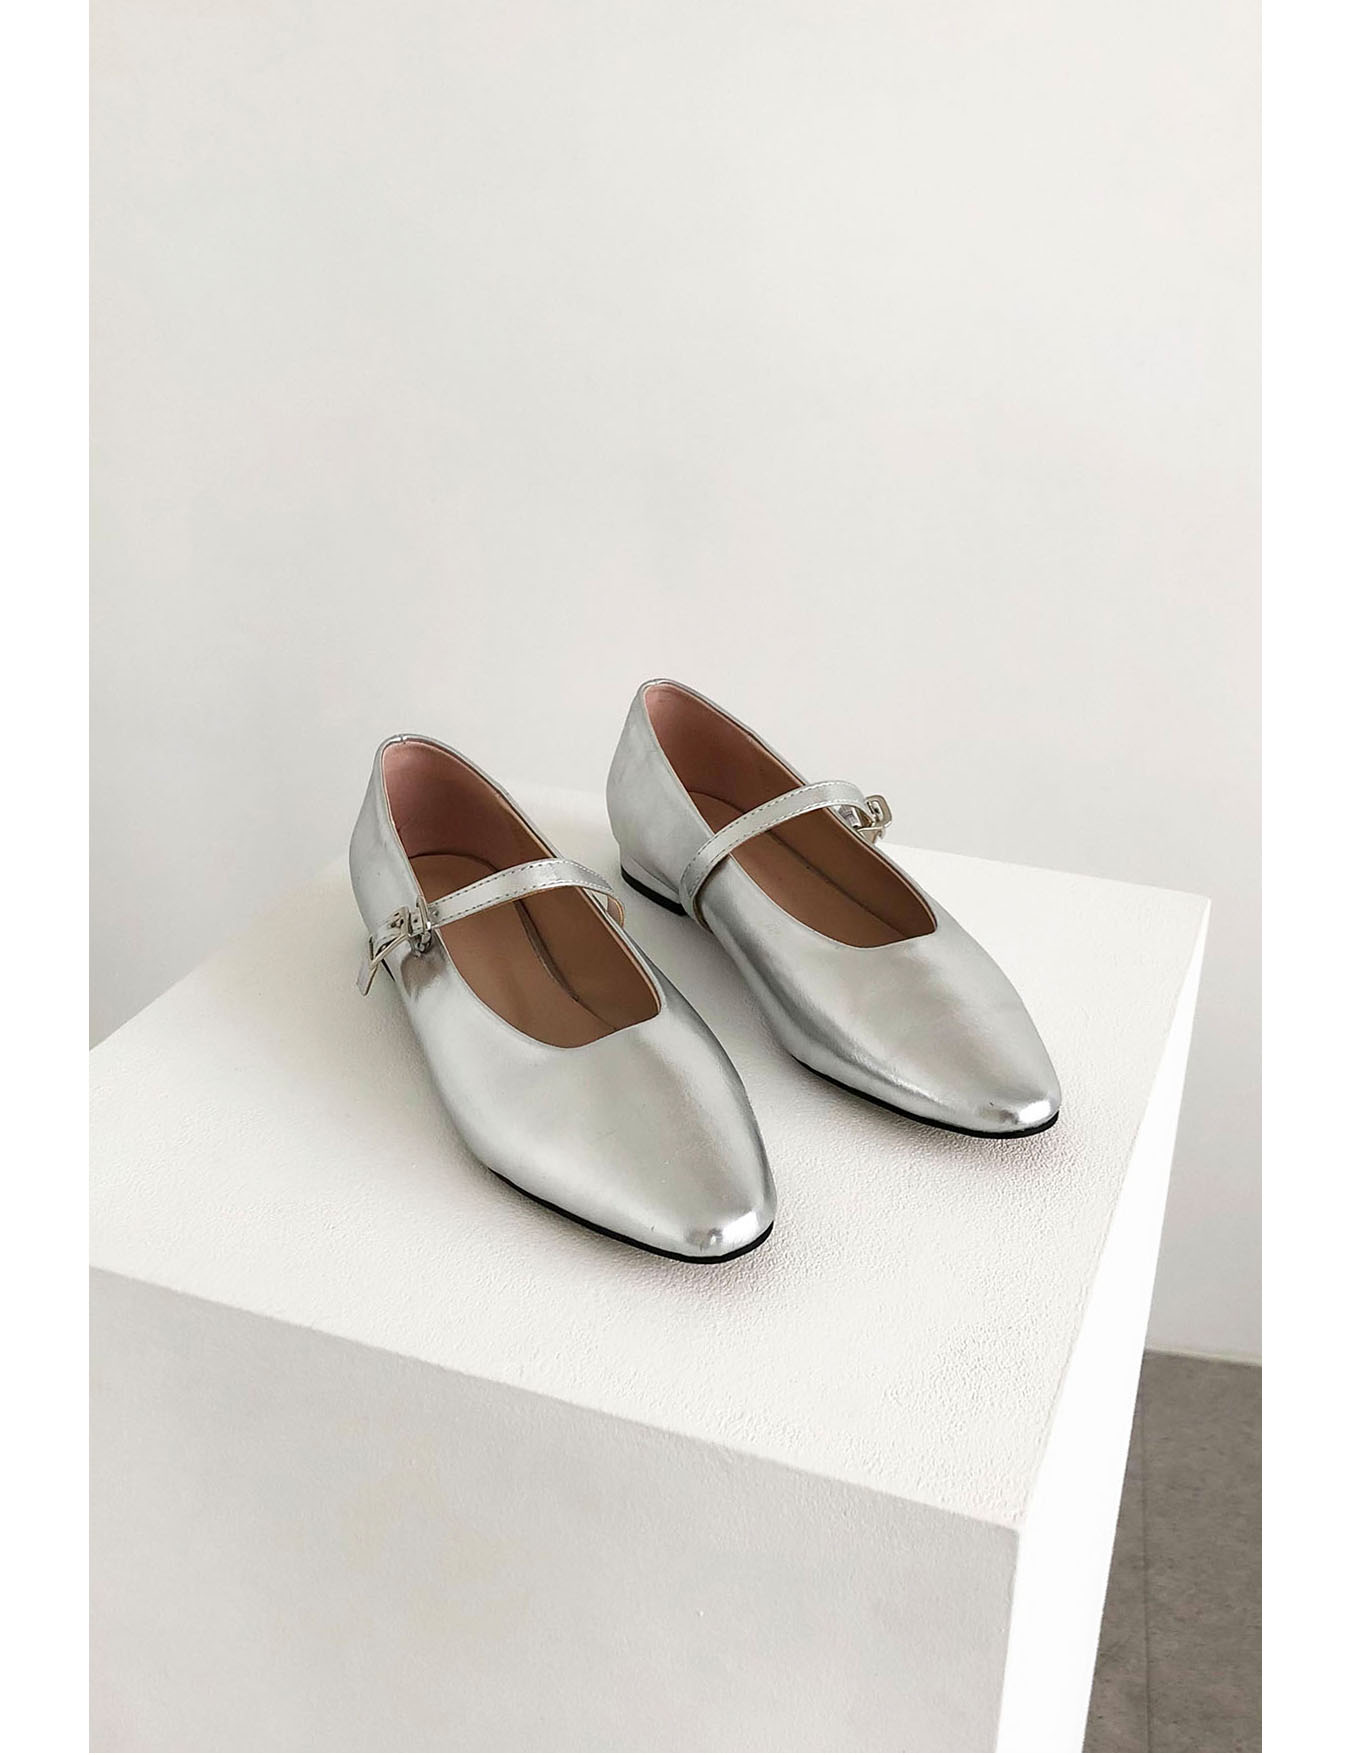 mary-jane flat shoes (2color)